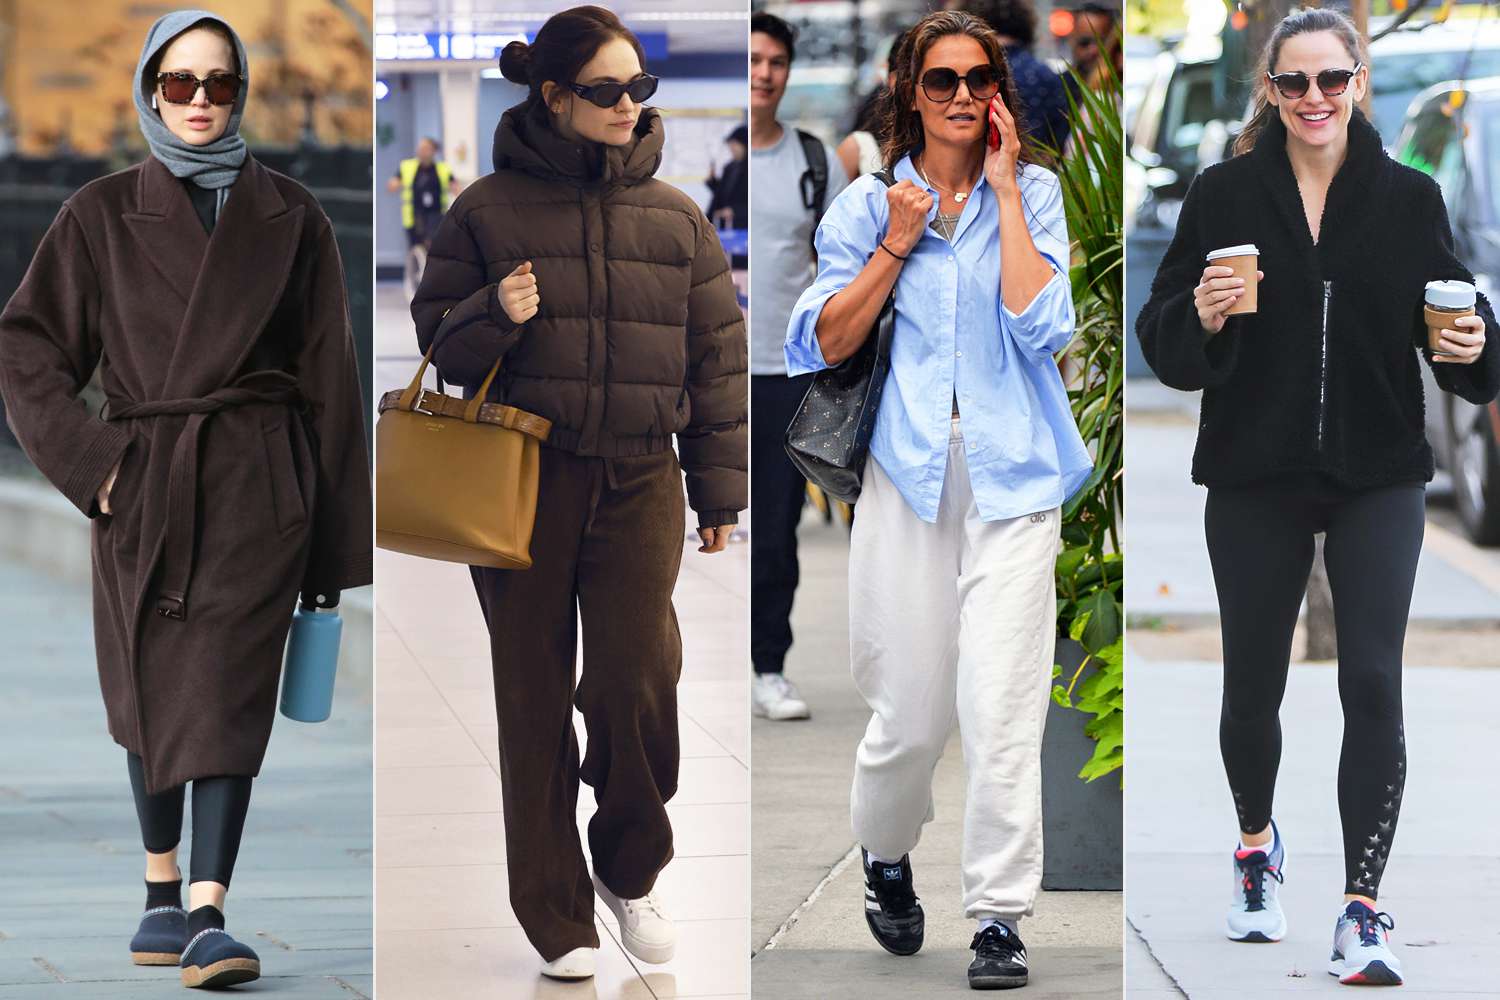 Katie Holmes, Jennifer Garner, and More Celebs Wear This Comfy Activewear Brand — and It’s Up to 70% Off Now